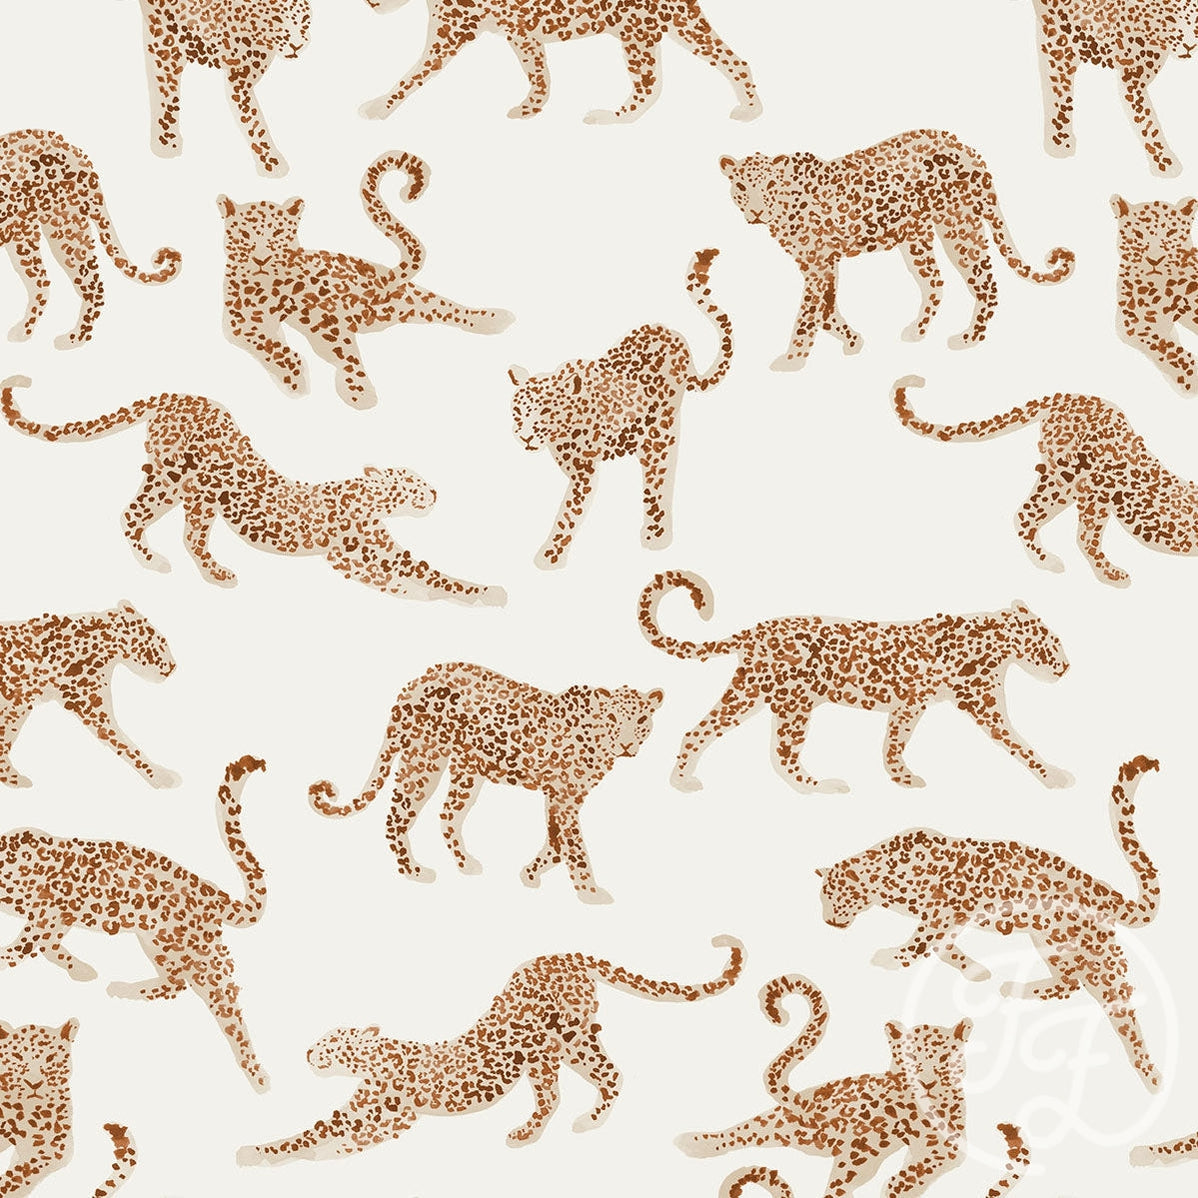 Family Fabrics | Leopards 100-1286 (by the full yard)